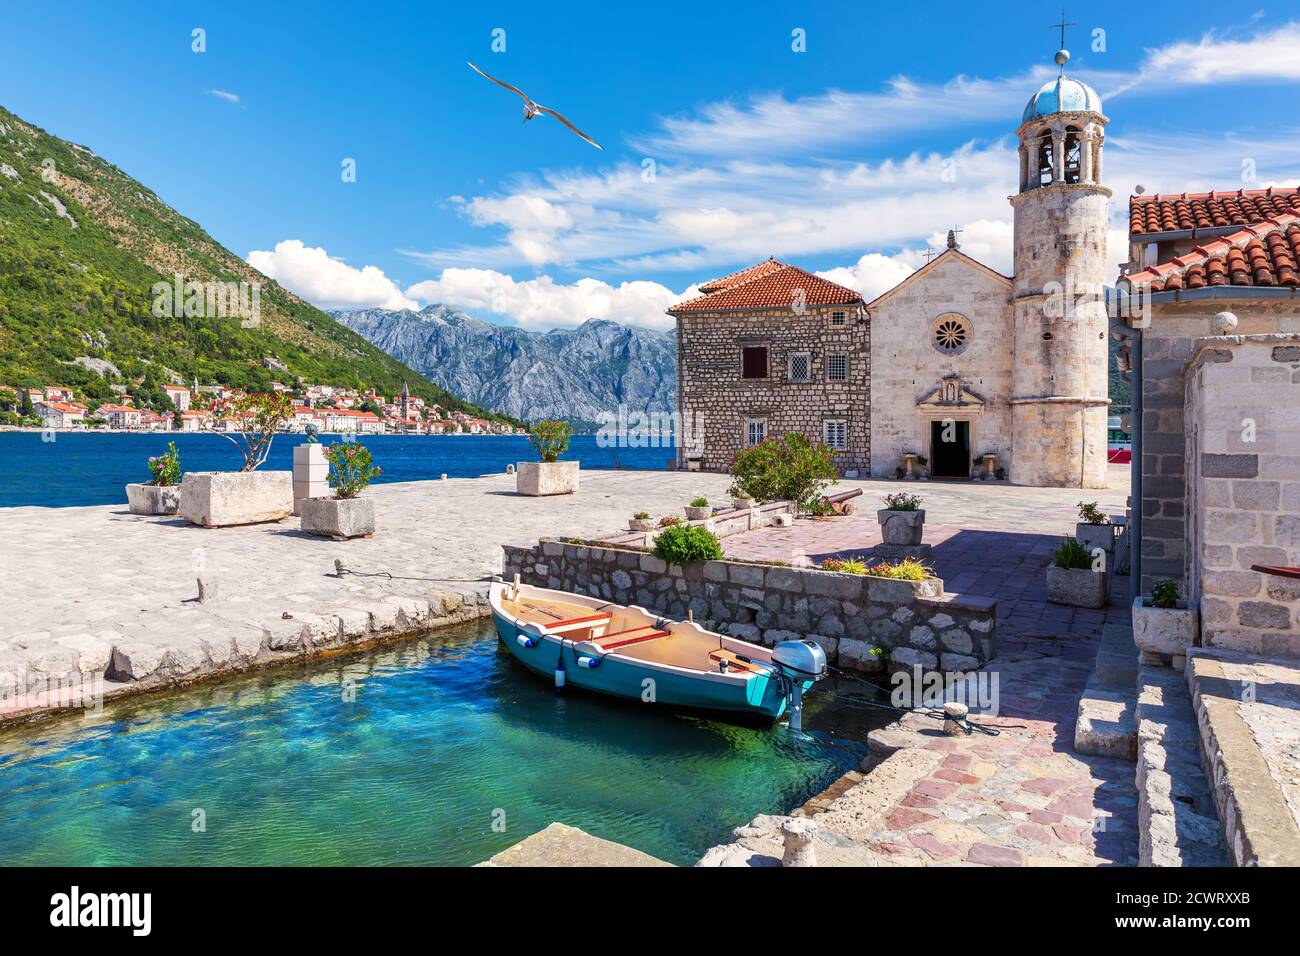 Church of Our Lady of the Rocks in the Bay of Kotor near Perast, Montenegro Stock Photo